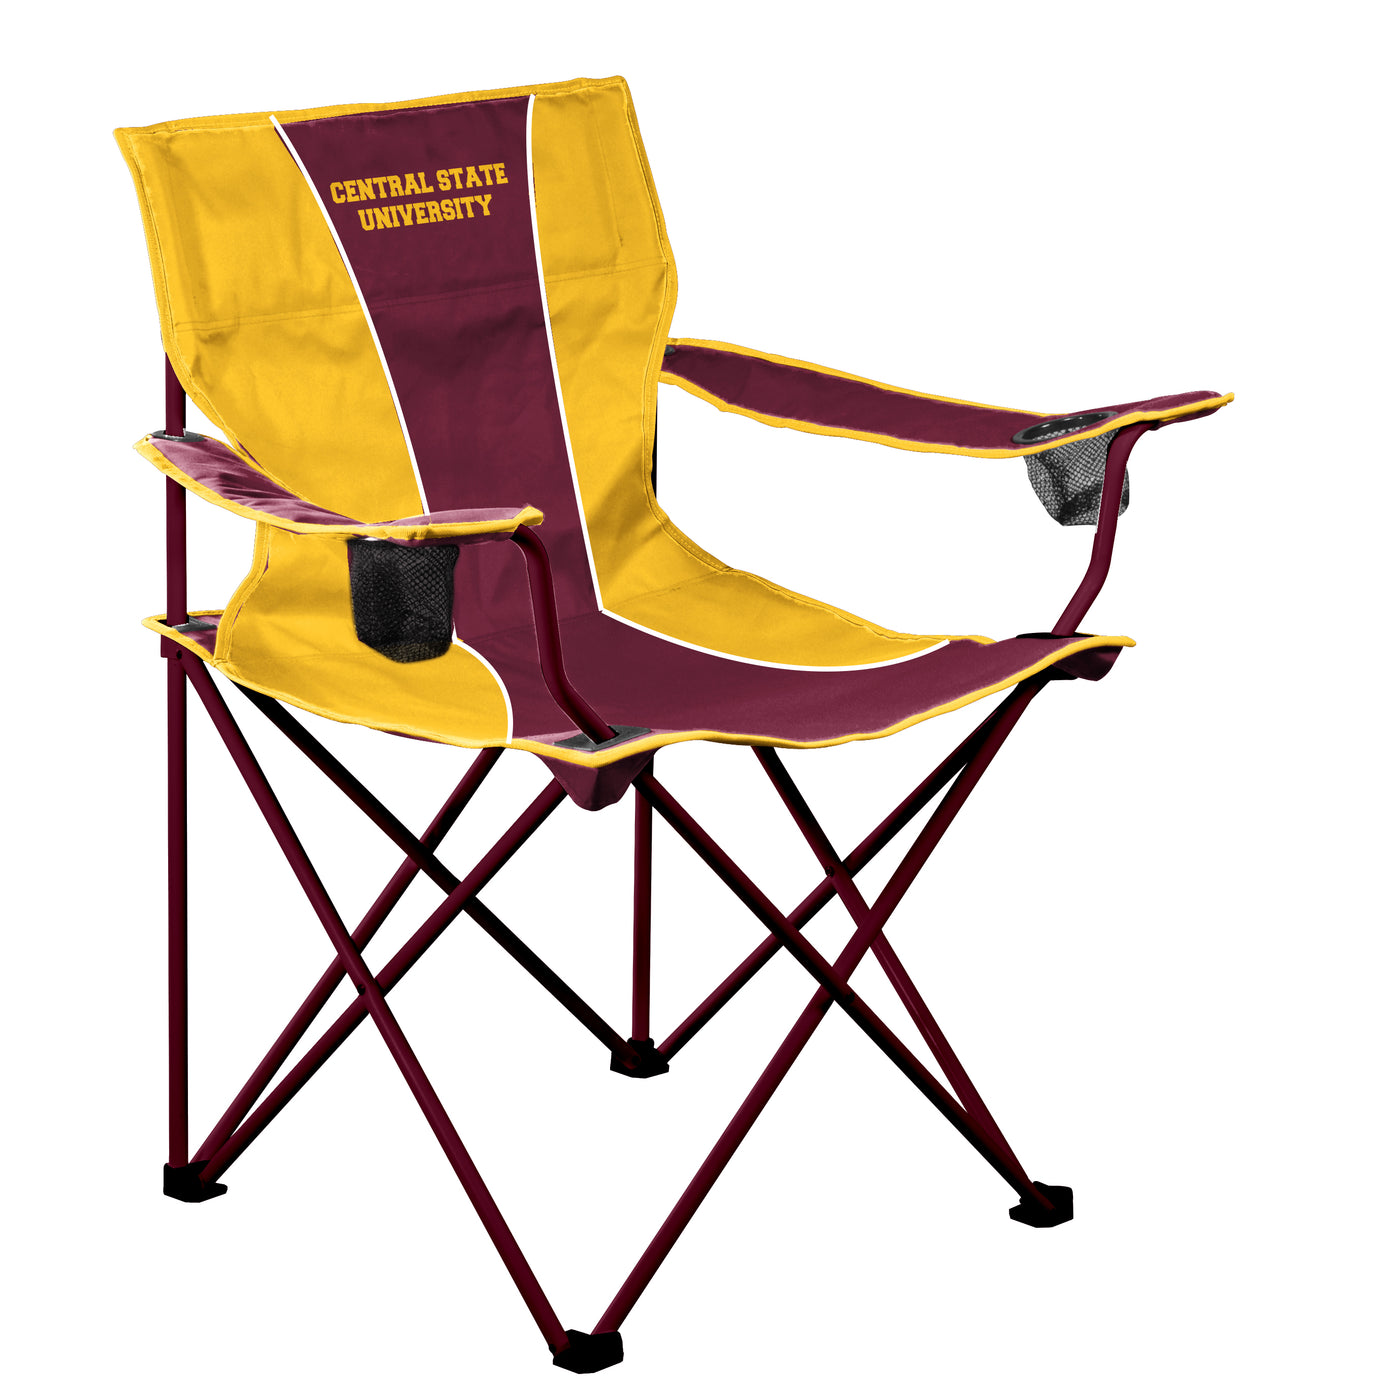 Central State University Big Boy Chair Colored Frame